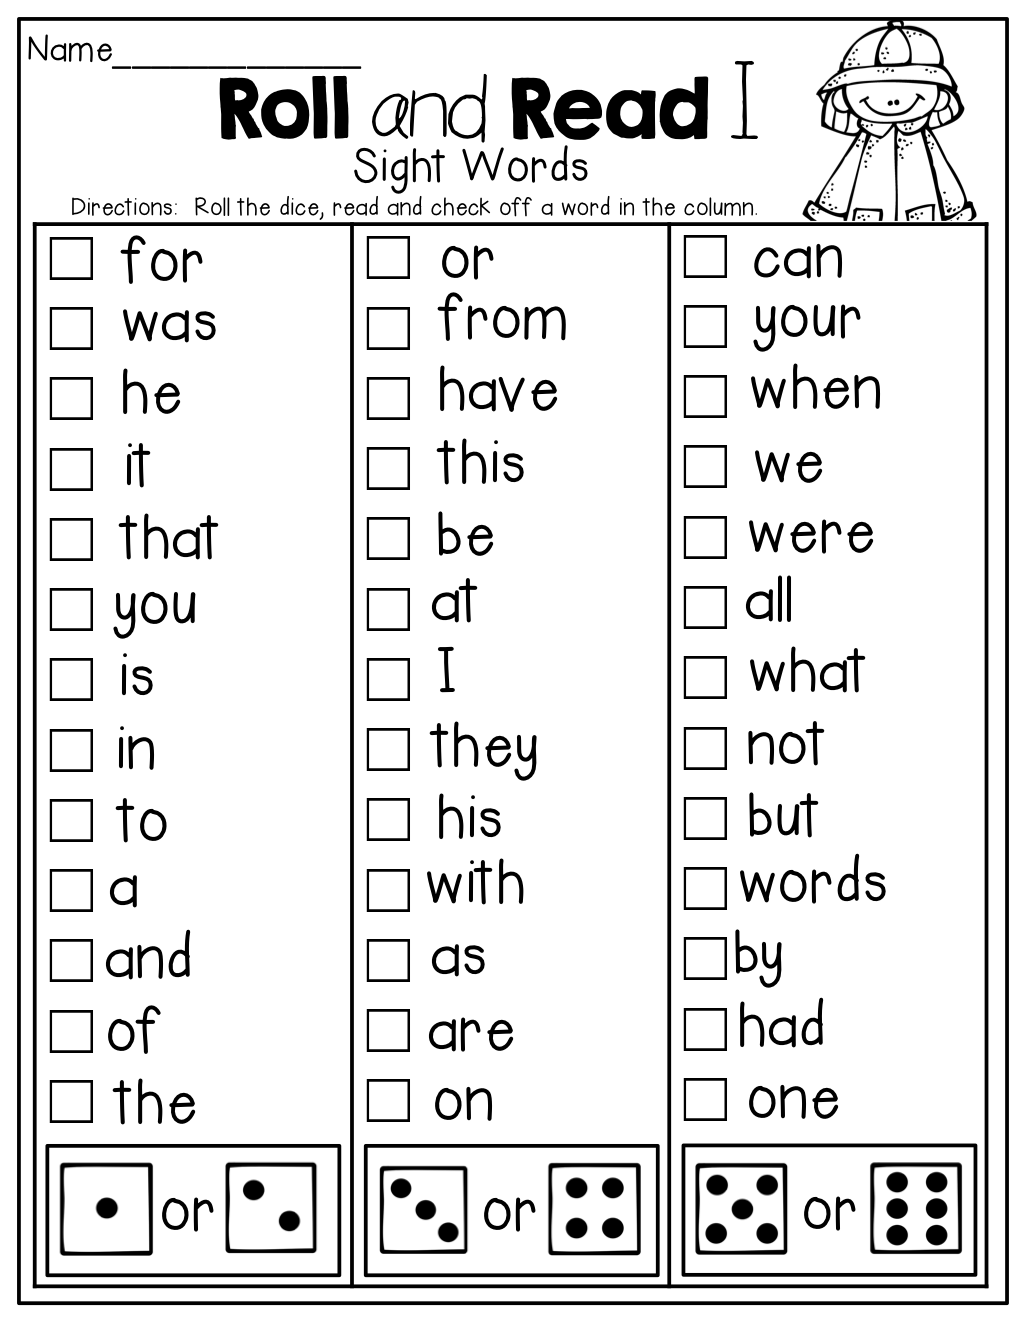 Roll and Read a sight word!  Such a FUN and effective way to practice sight word fluency!